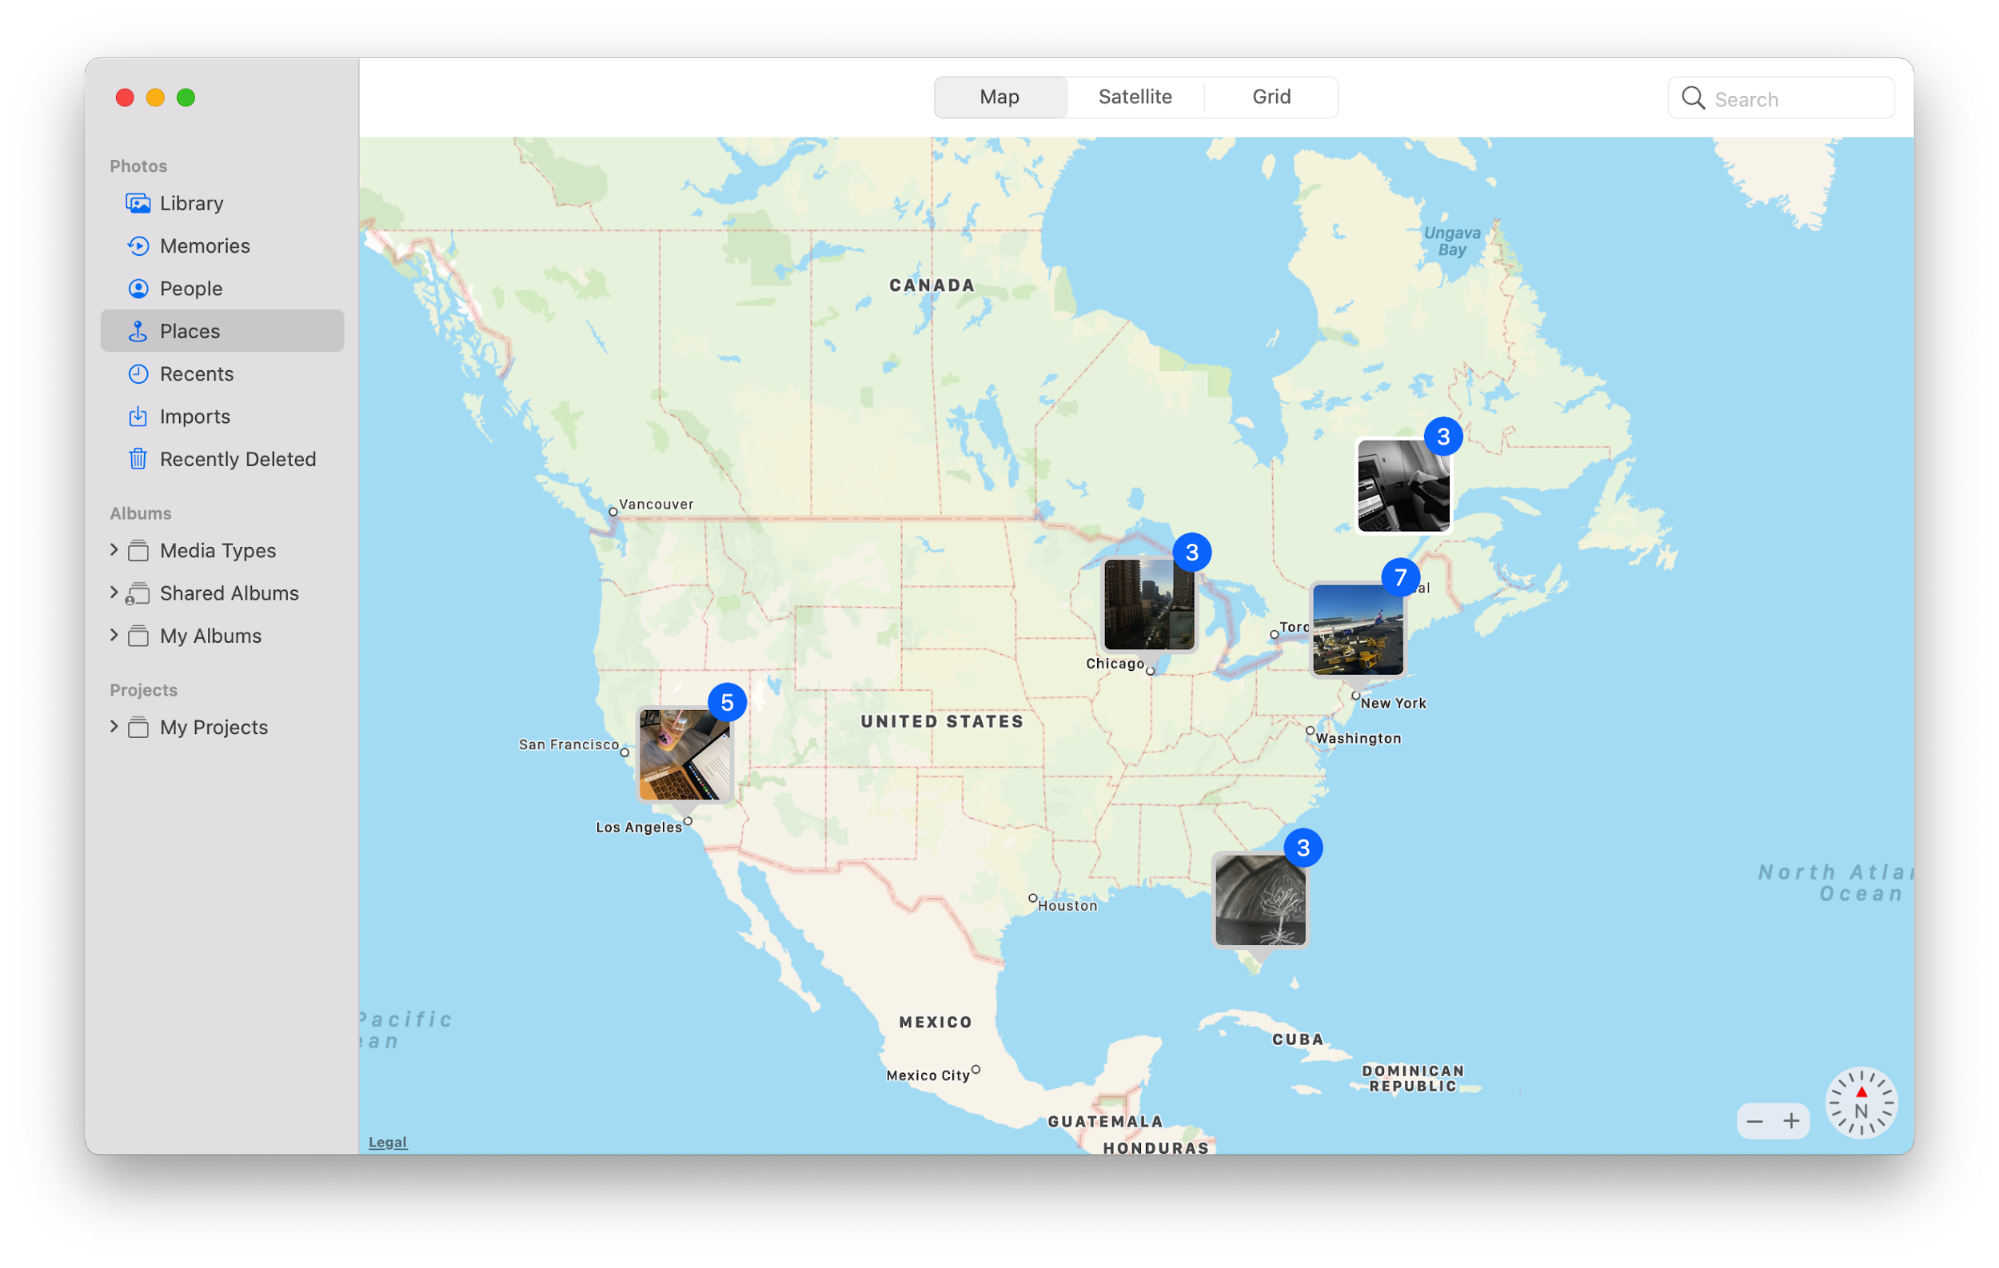 The grouping of photos by places in apple photo library